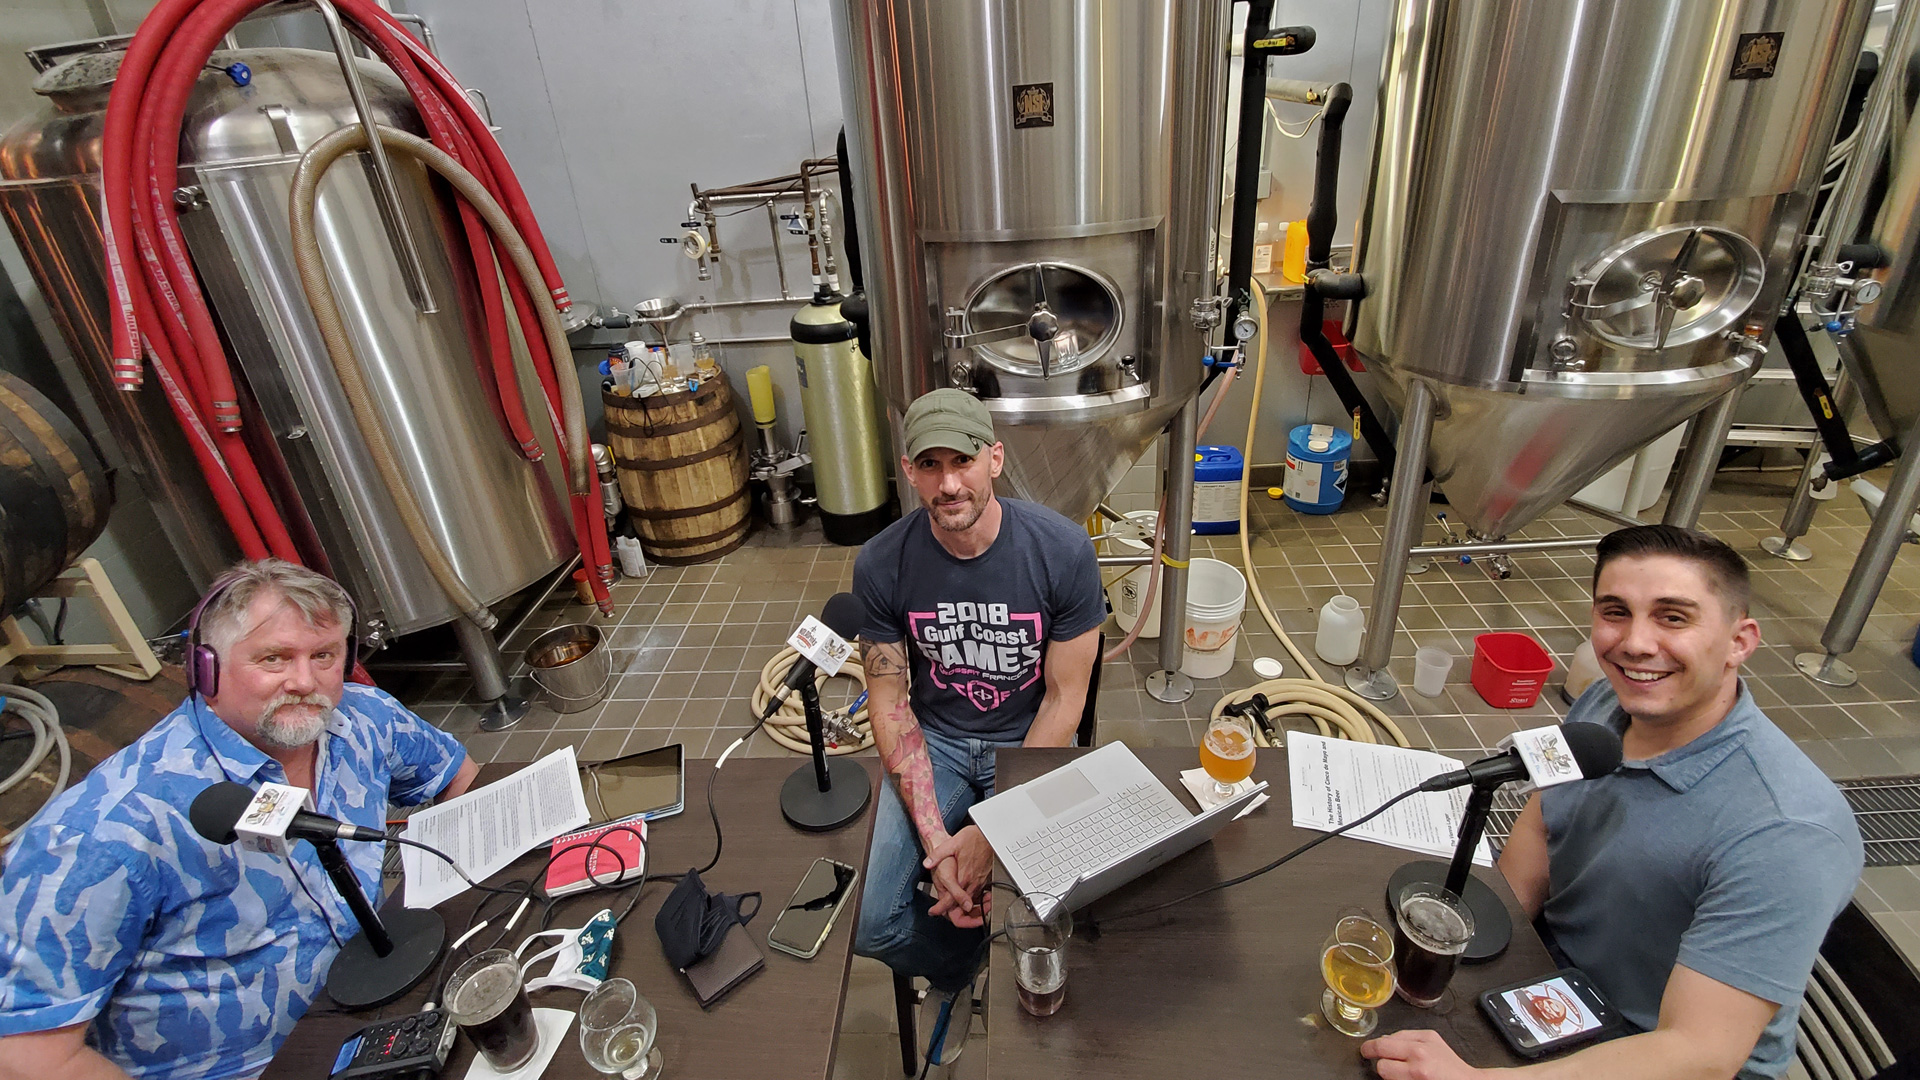 The NOLADrinks Show with Bryan Dias – Mexican Style Lager and More on Beer – 2021Ep7. Bryan Dias of The NOLADrinks Show, Matt Horney of Old Rail Brewing Co., and Sal Mortillaro of the Beer Judging Certification Program.